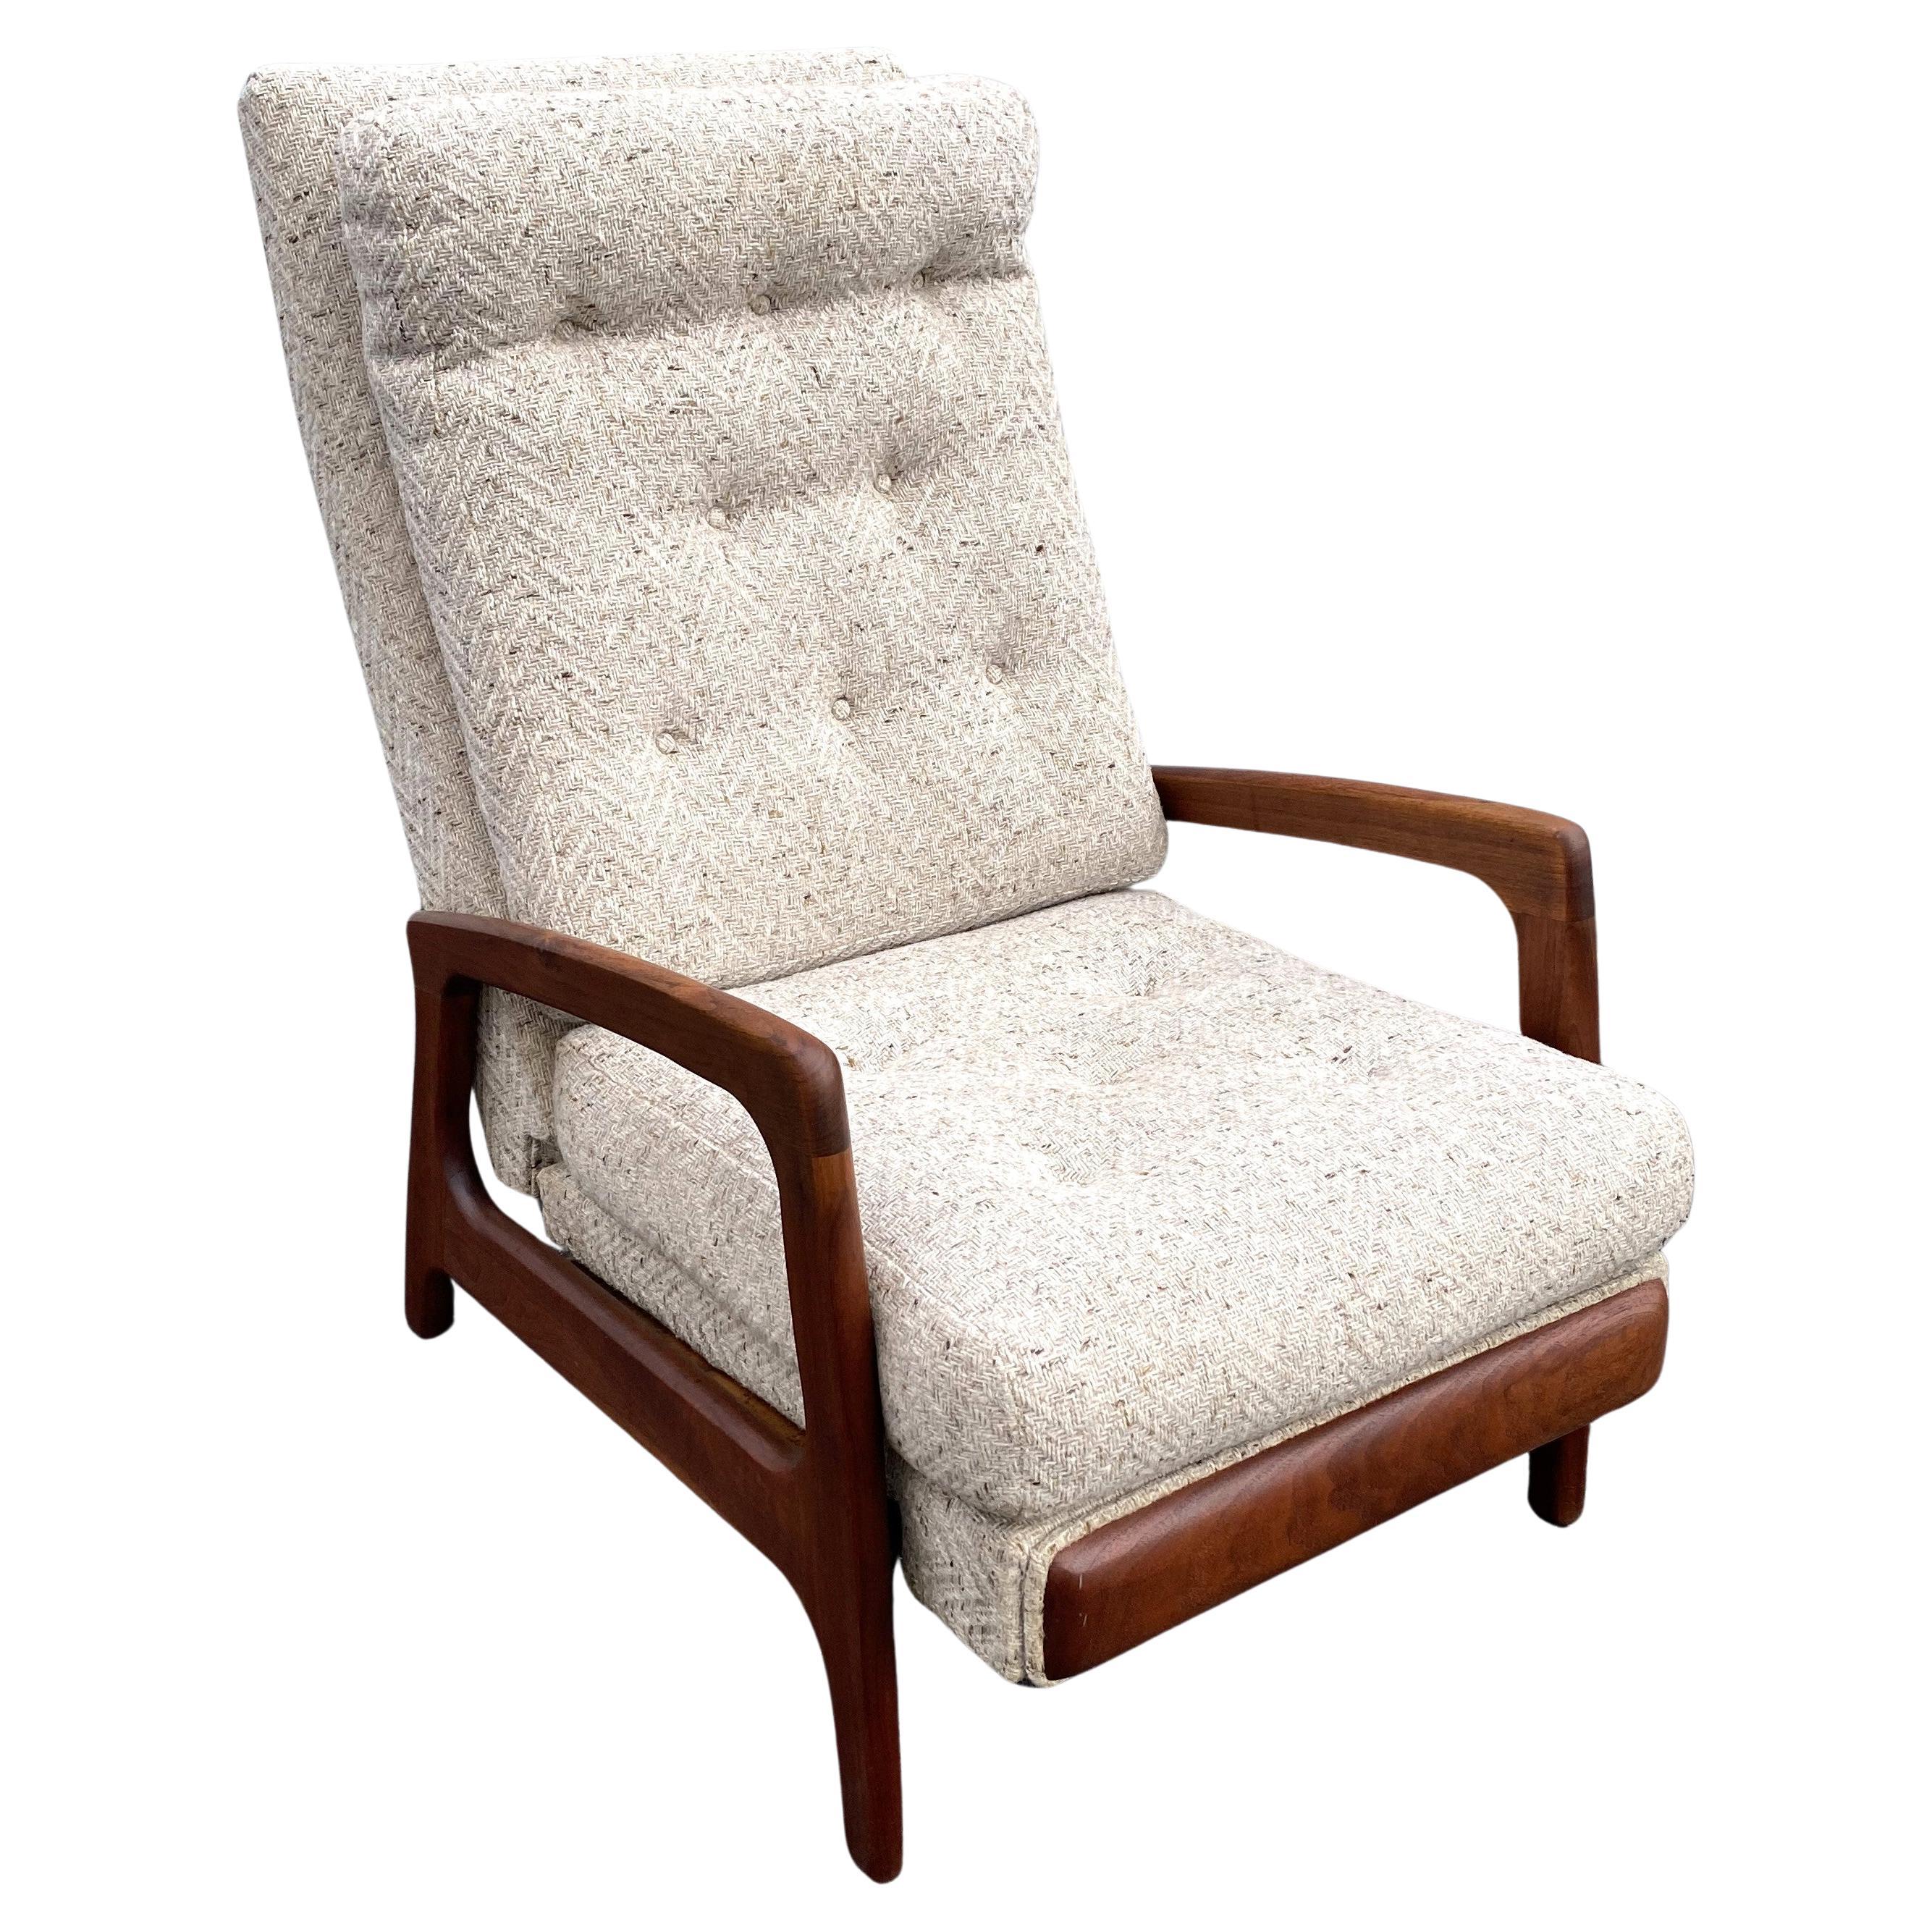 Adrian Pearsall Mid Century Modern Walnut Upholstered Reclining Arm Lounge Chair For Sale